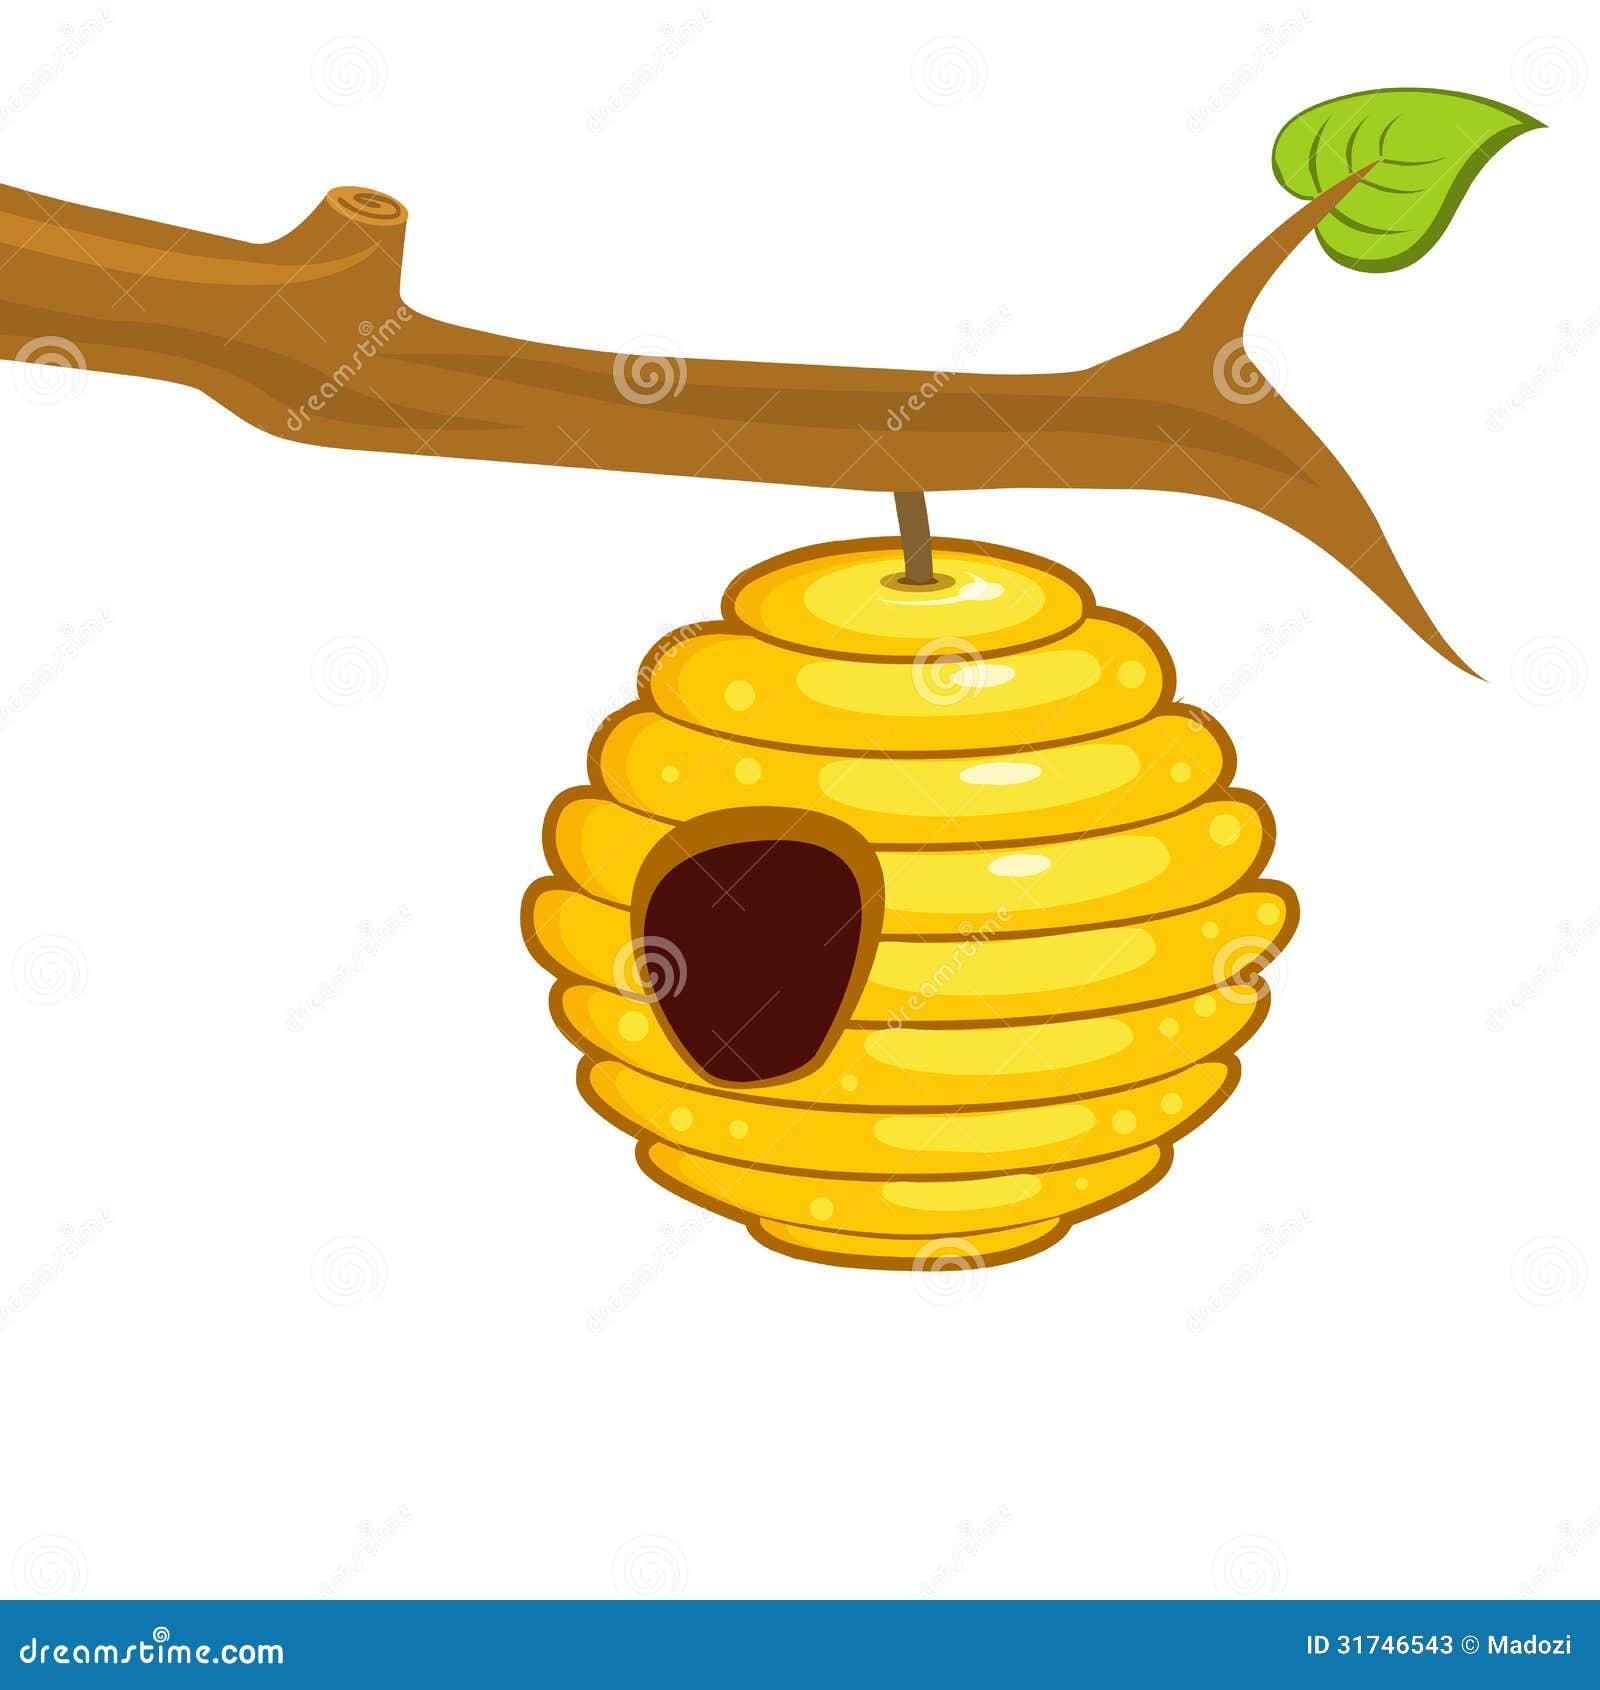 Beehive Hanging From A Branch Stock Photos - Image: 31746543